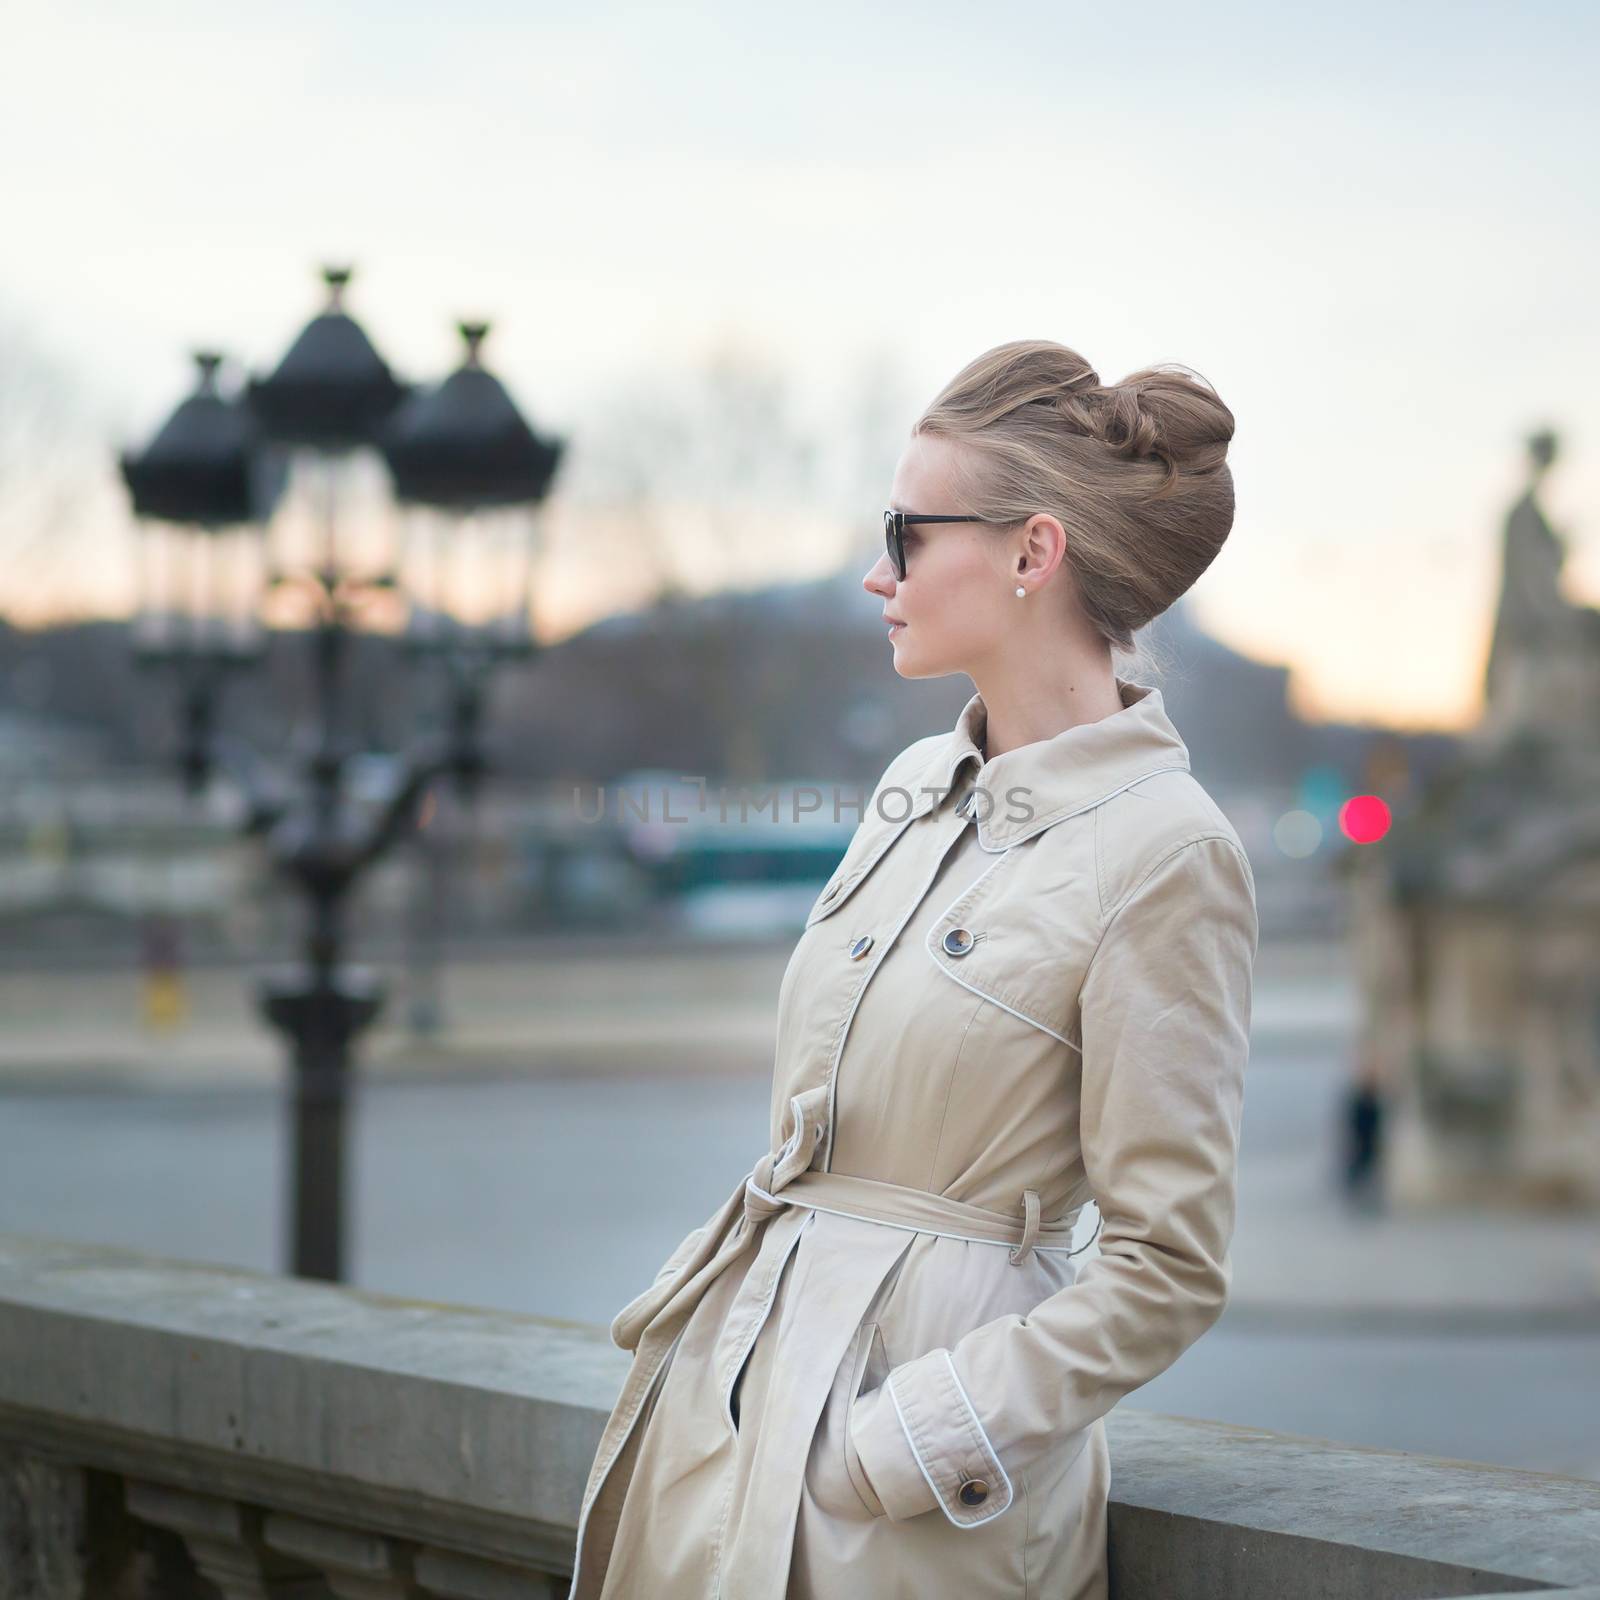 Elegant young Parisian woman outdoors by jaspe